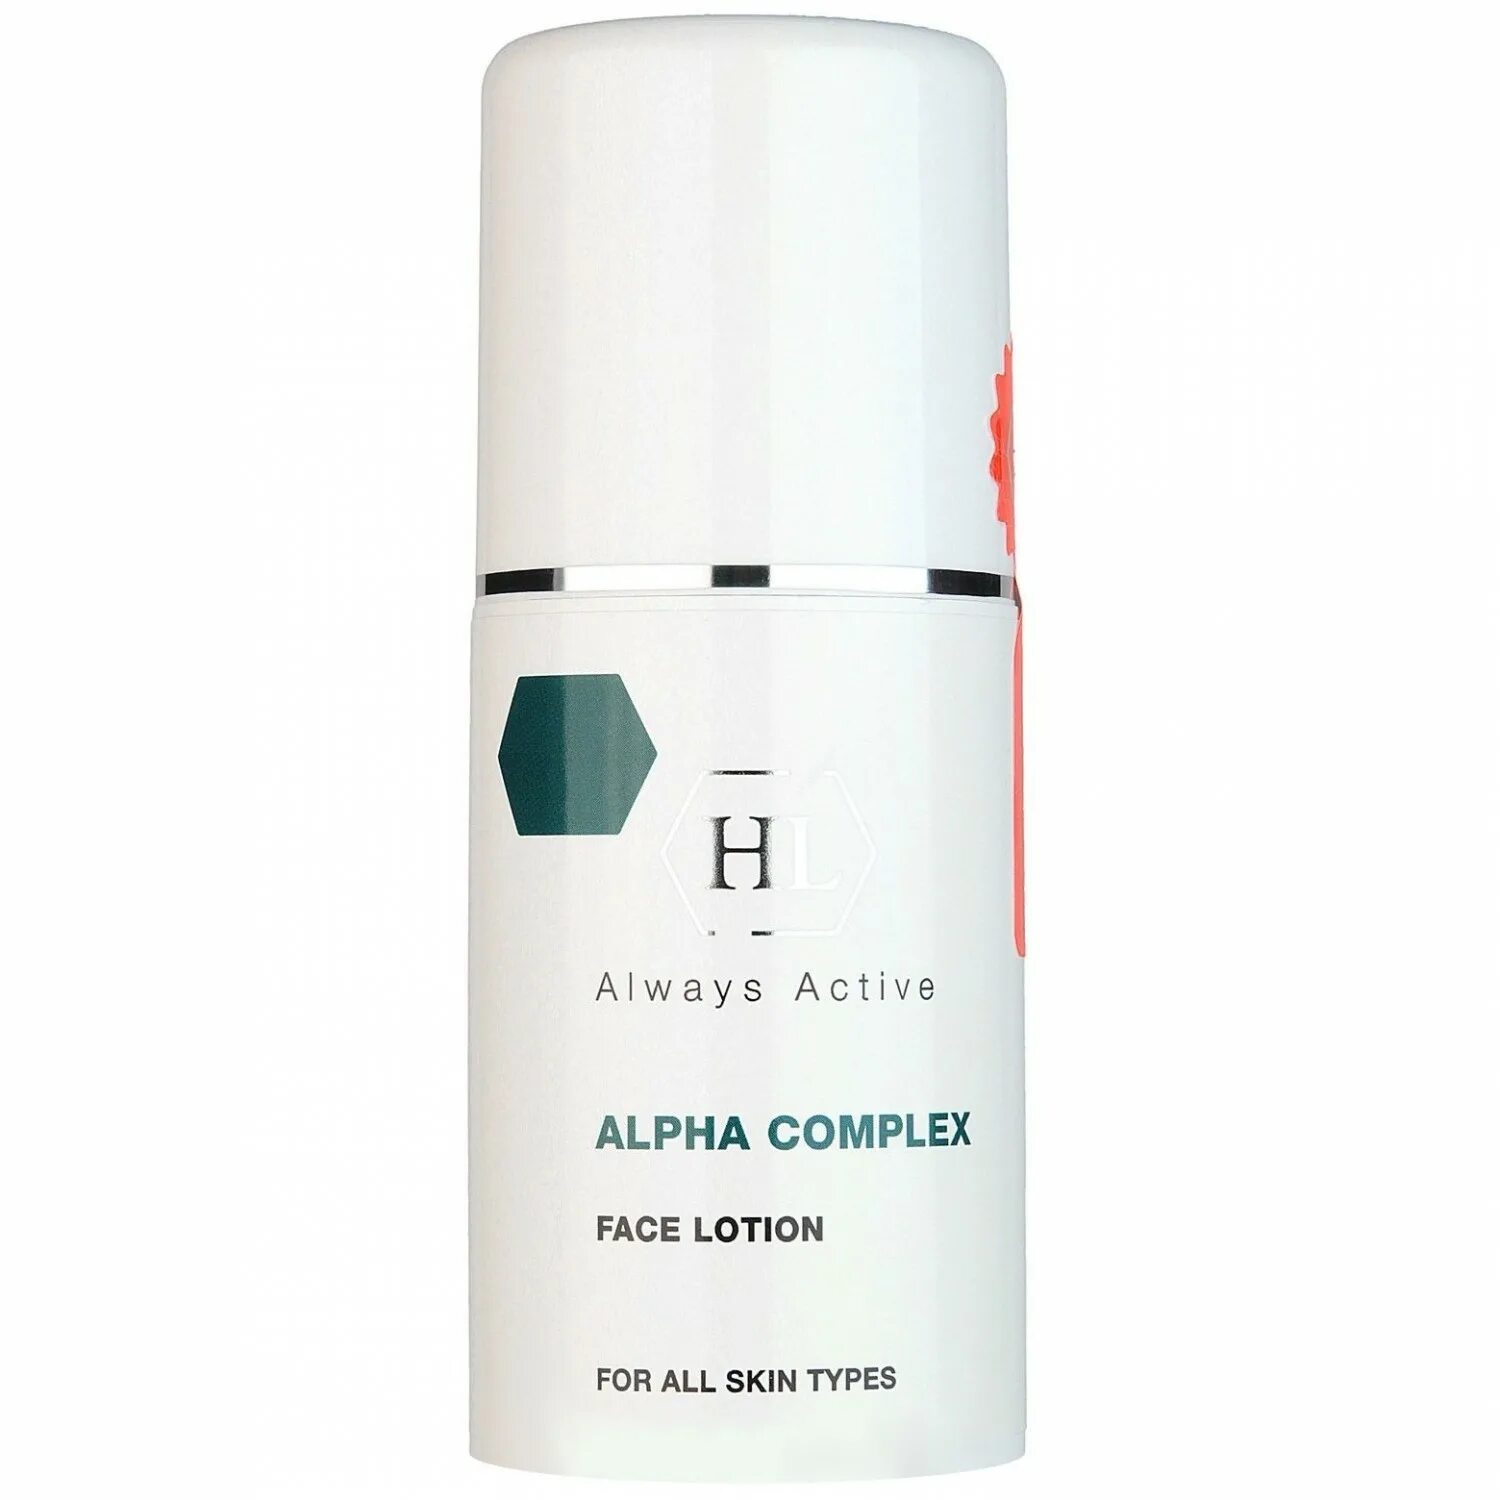 Holy Land Alpha Complex face Lotion. Holy Land Alpha Complex face Lotion 125мл. Лосьон для лица Holy Land Alpha Complex face Lotion 125 мл. Holy Land Alpha Complex face Lotion лосьон для лица. Холе альфа